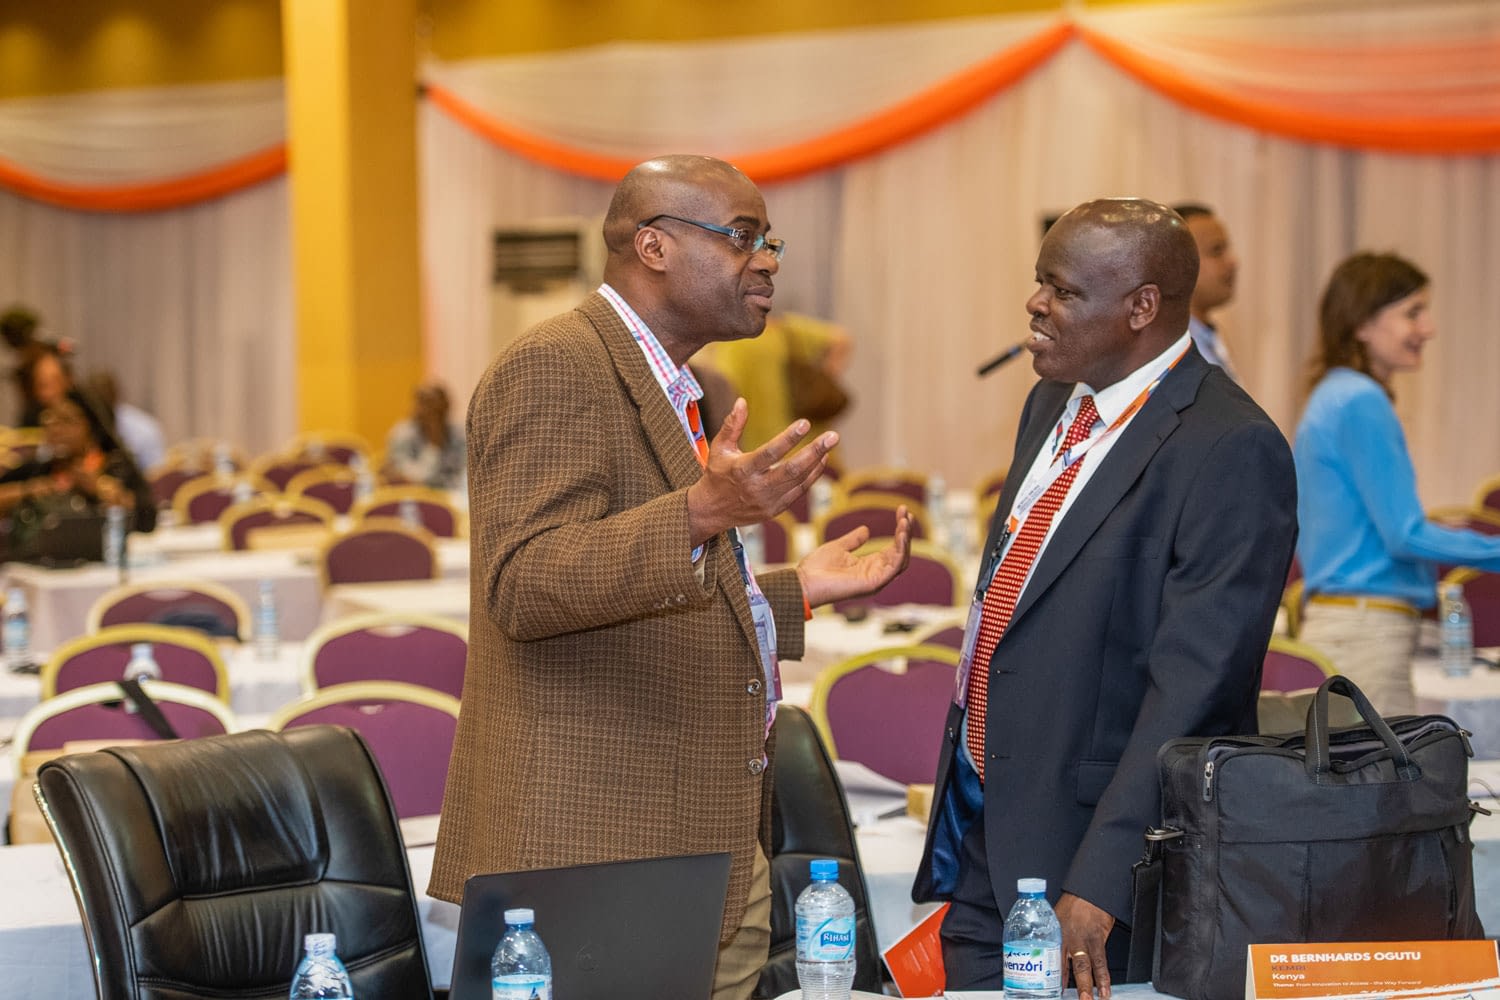 From left, Prof. Kelly Chibale of University of Cape Town, South Africa and Dr Bernhards Ogutu of KEMRI Kenya sharing an interactive moment.